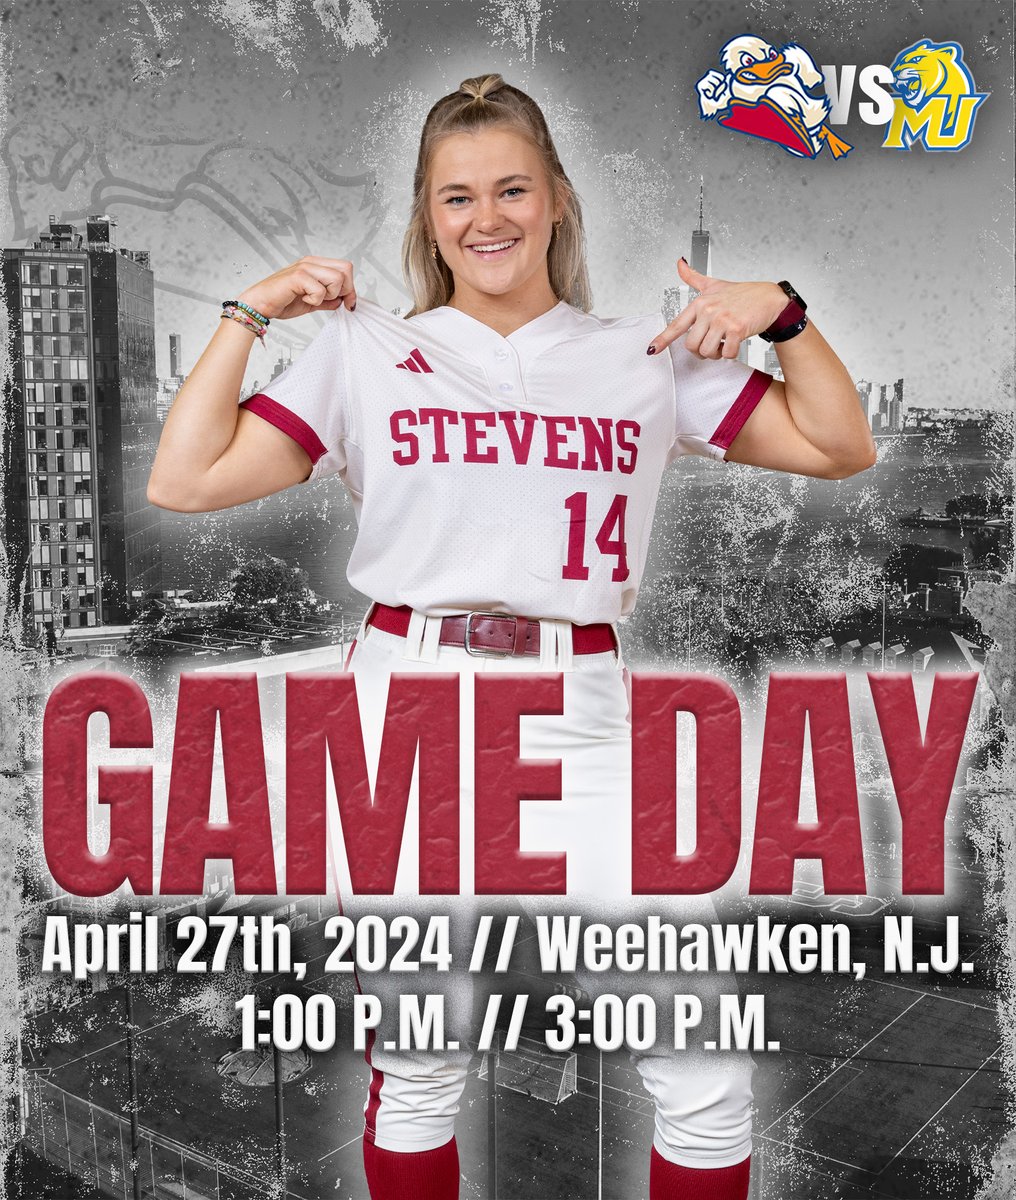 Trying to play our way into the postseason today! @StevensSoftball 🆚 Misericordia ⏰ 1 PM//3 PM 📍 Weehawken, N.J. 🏟️ Waterfront Park 📊 tinyurl.com/yamv4ry3 (G1) 📊 tinyurl.com/mwhezh8k (G2) 📺 tinyurl.com/45wkb4wf #AllRise #MACsb #d3sb